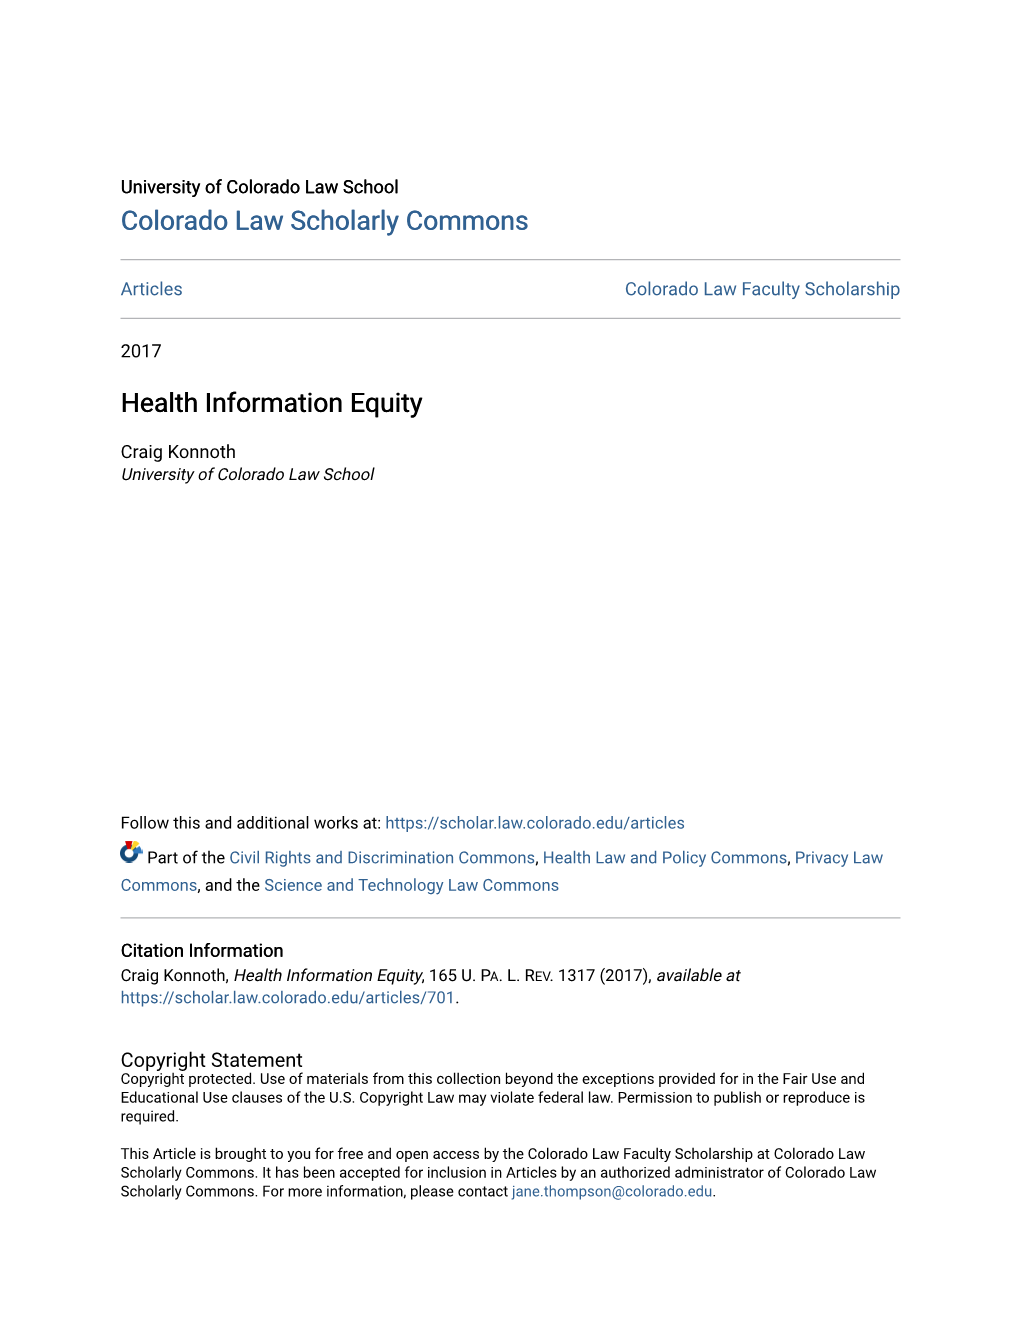 Health Information Equity